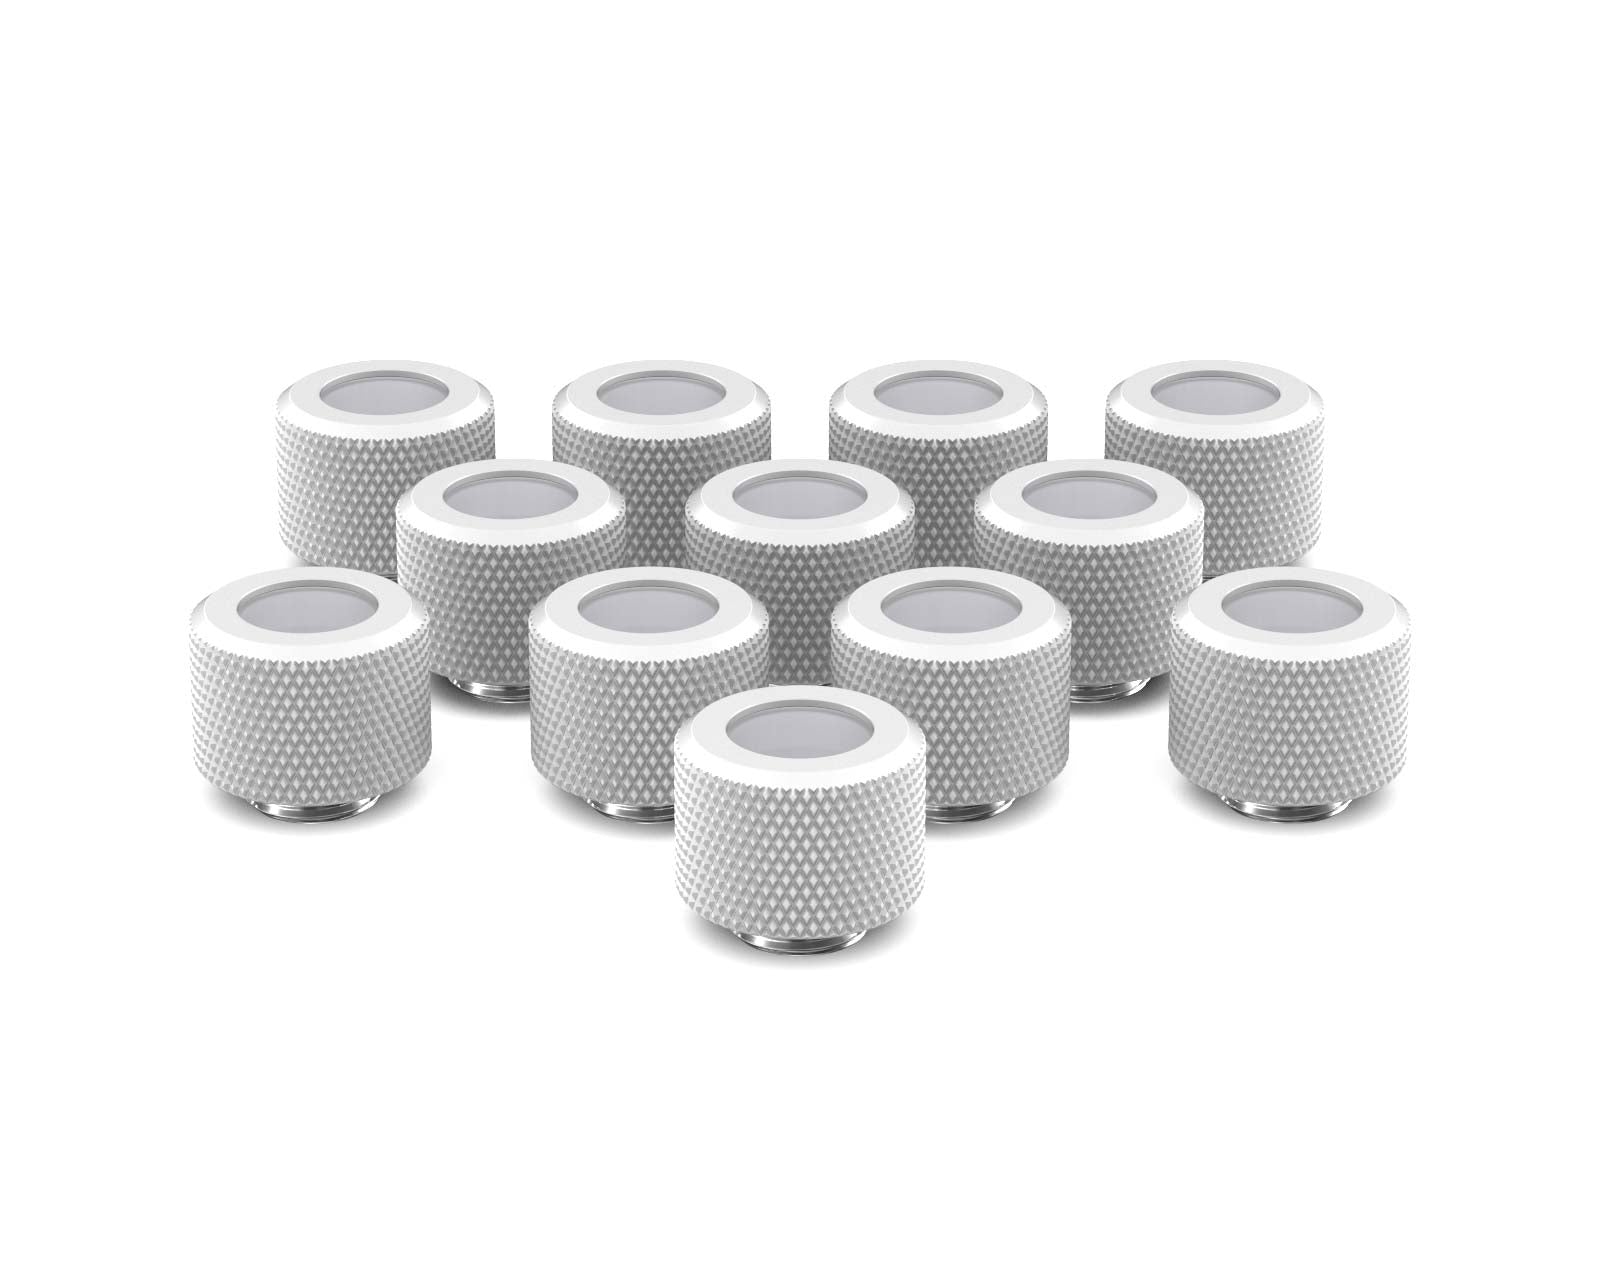 PrimoChill 12mm OD Rigid SX Fitting - 12 Pack - PrimoChill - KEEPING IT COOL Sky White